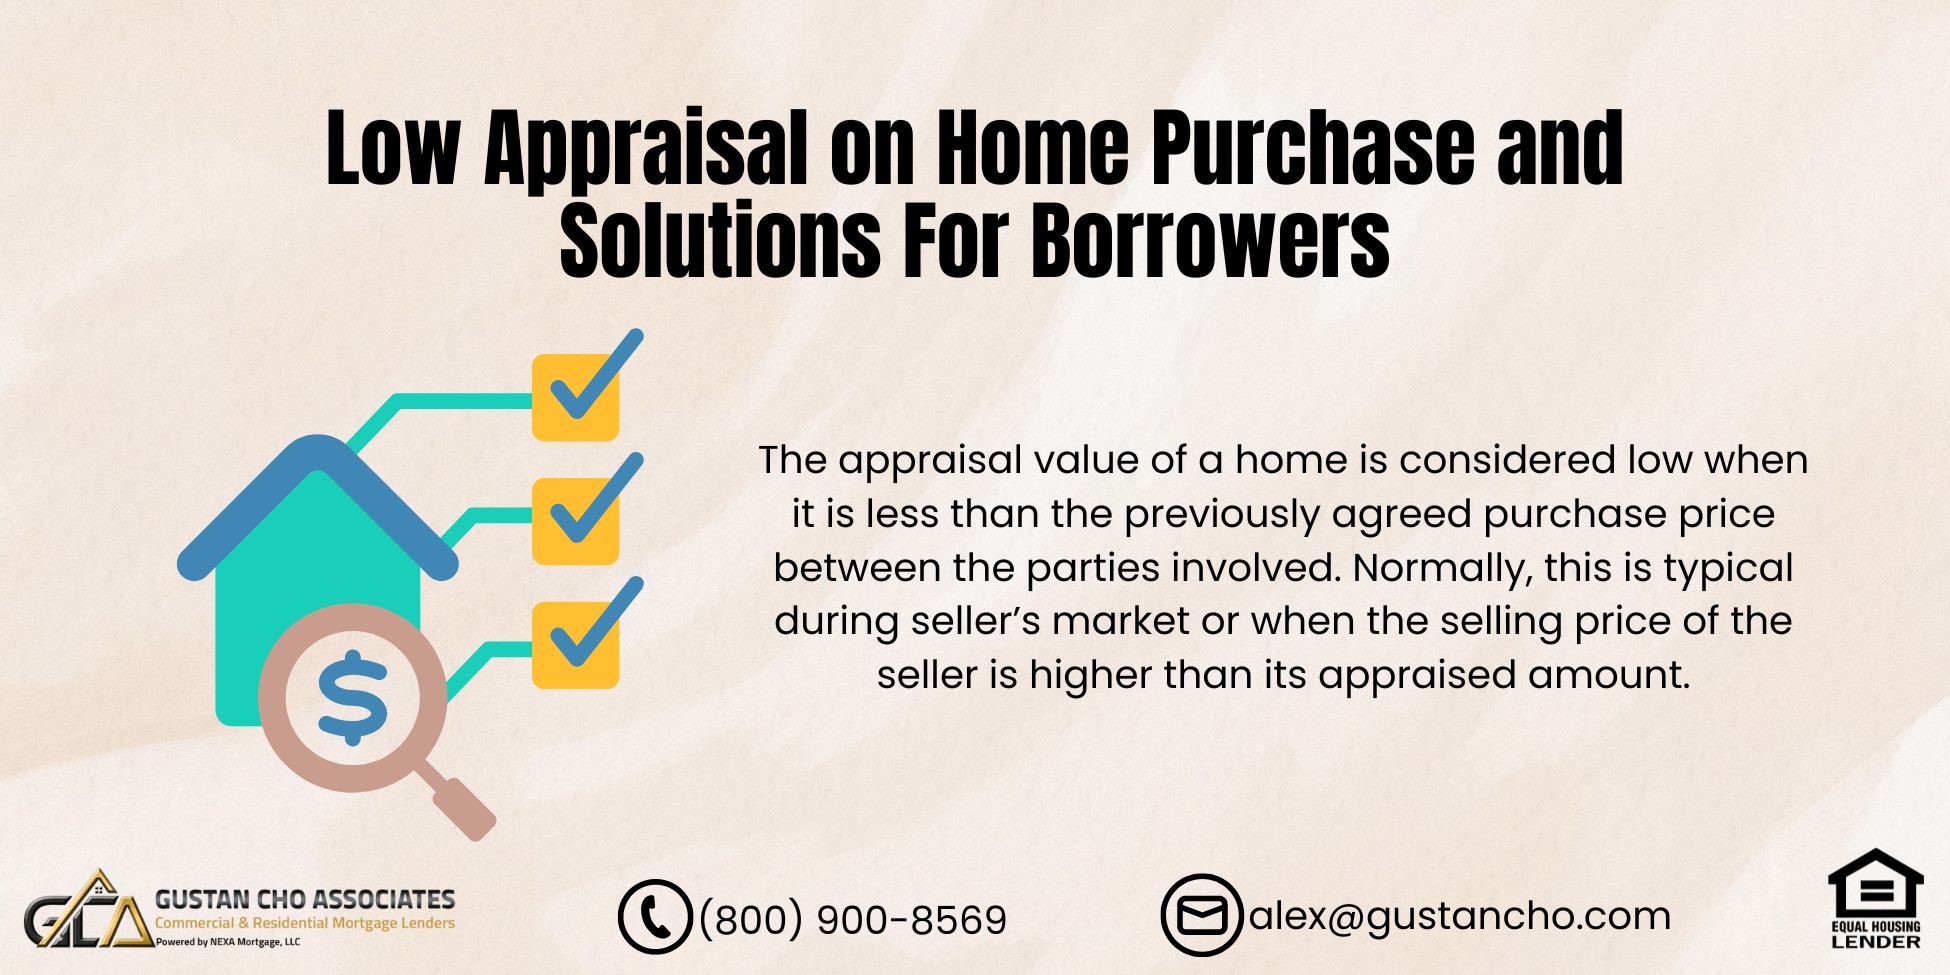 Low Appraisal on Home Purchase